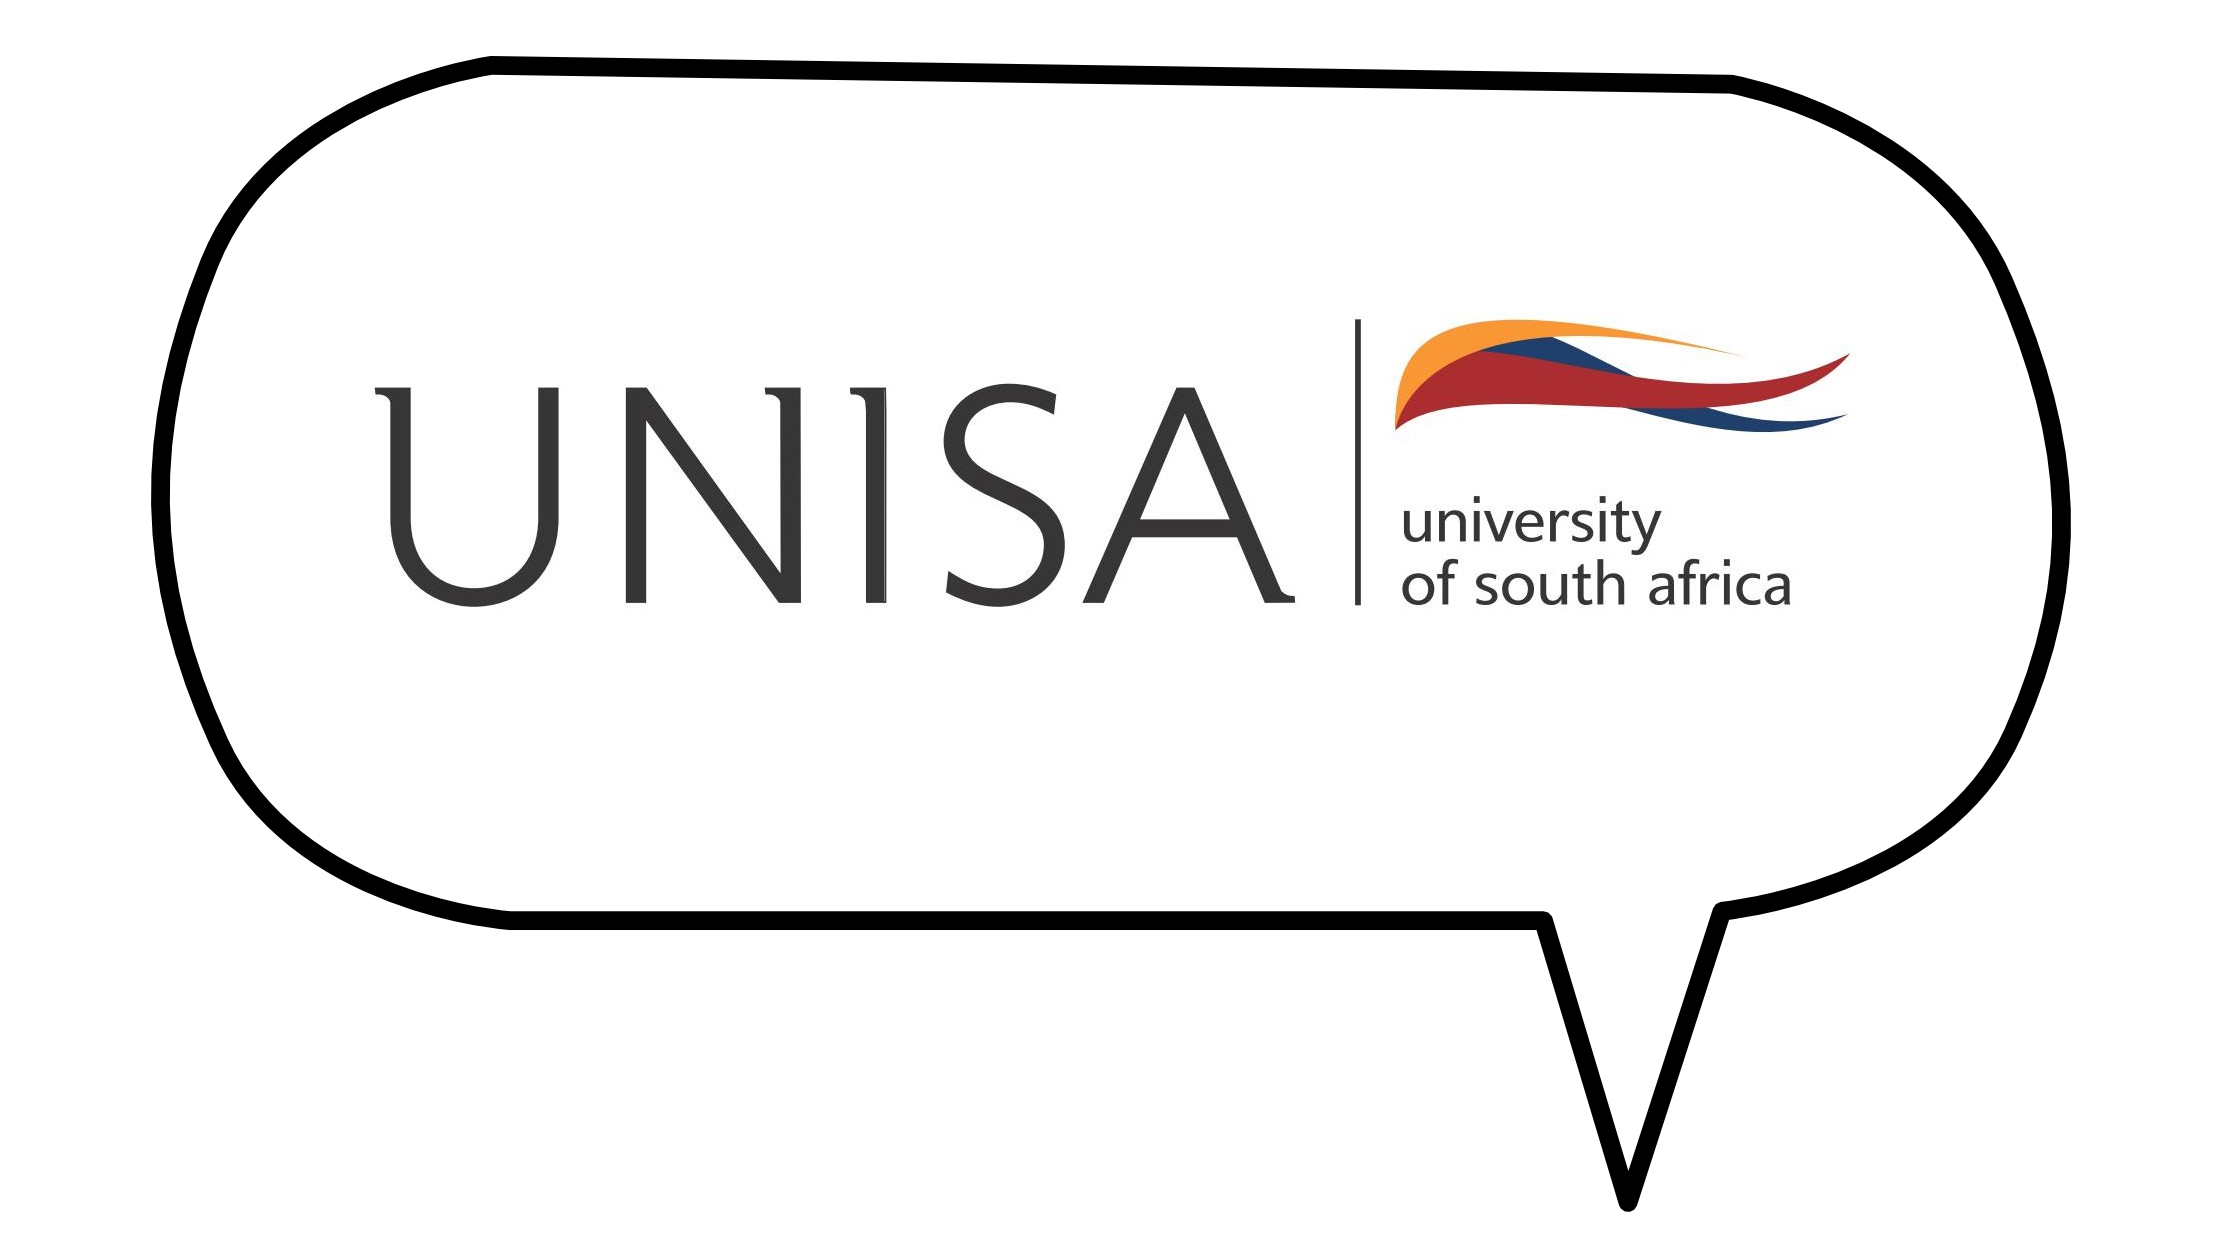 I want to register at Unisa, but didn’t apply during the application period. What should I do?